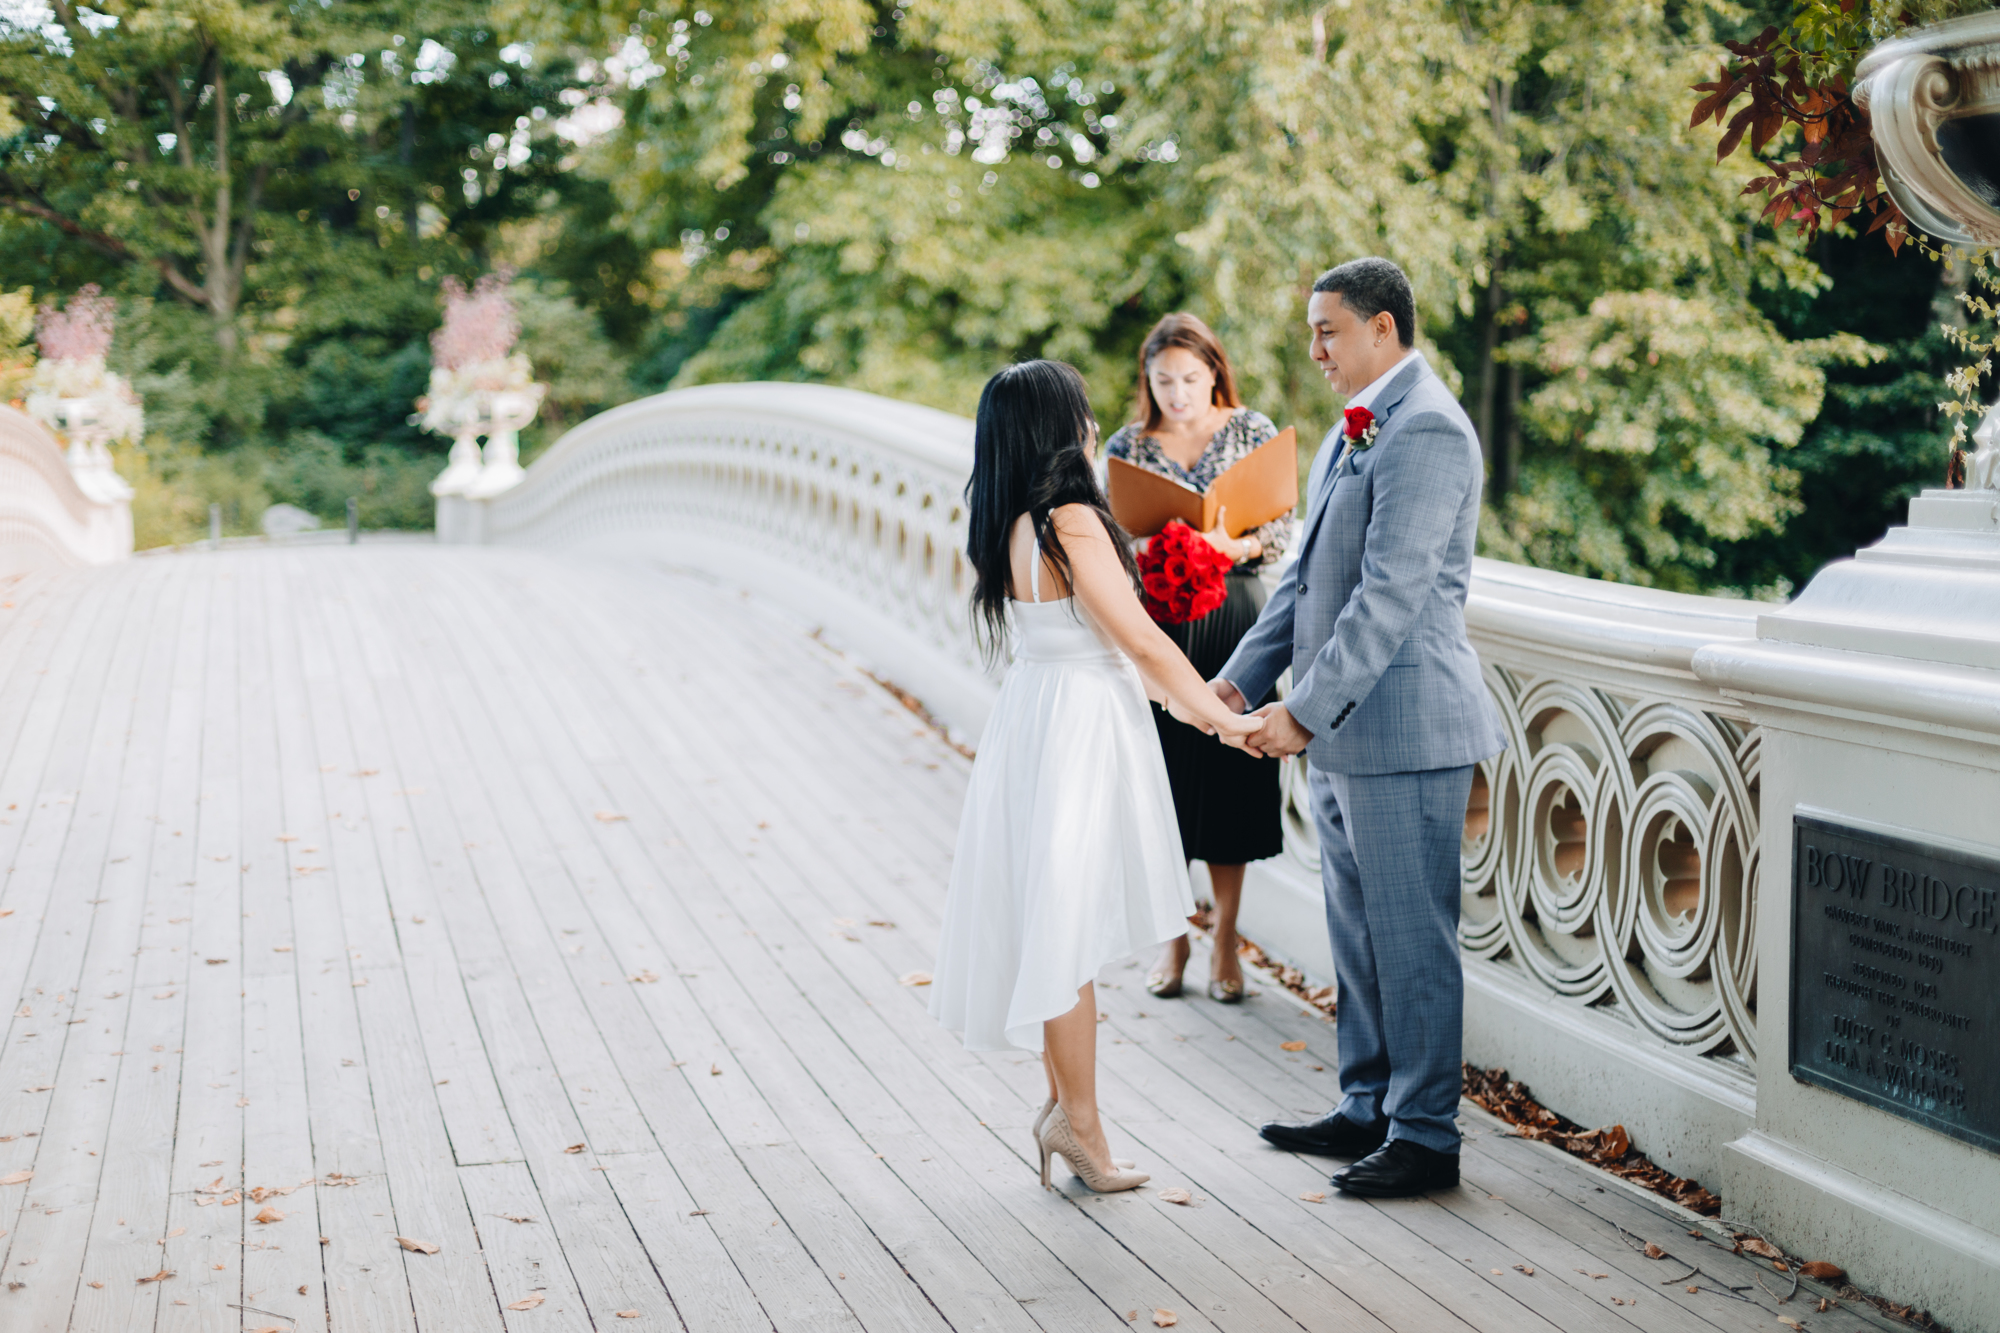 Fun and Candid Bow Bridge Elopement Photos in Fall Foliage